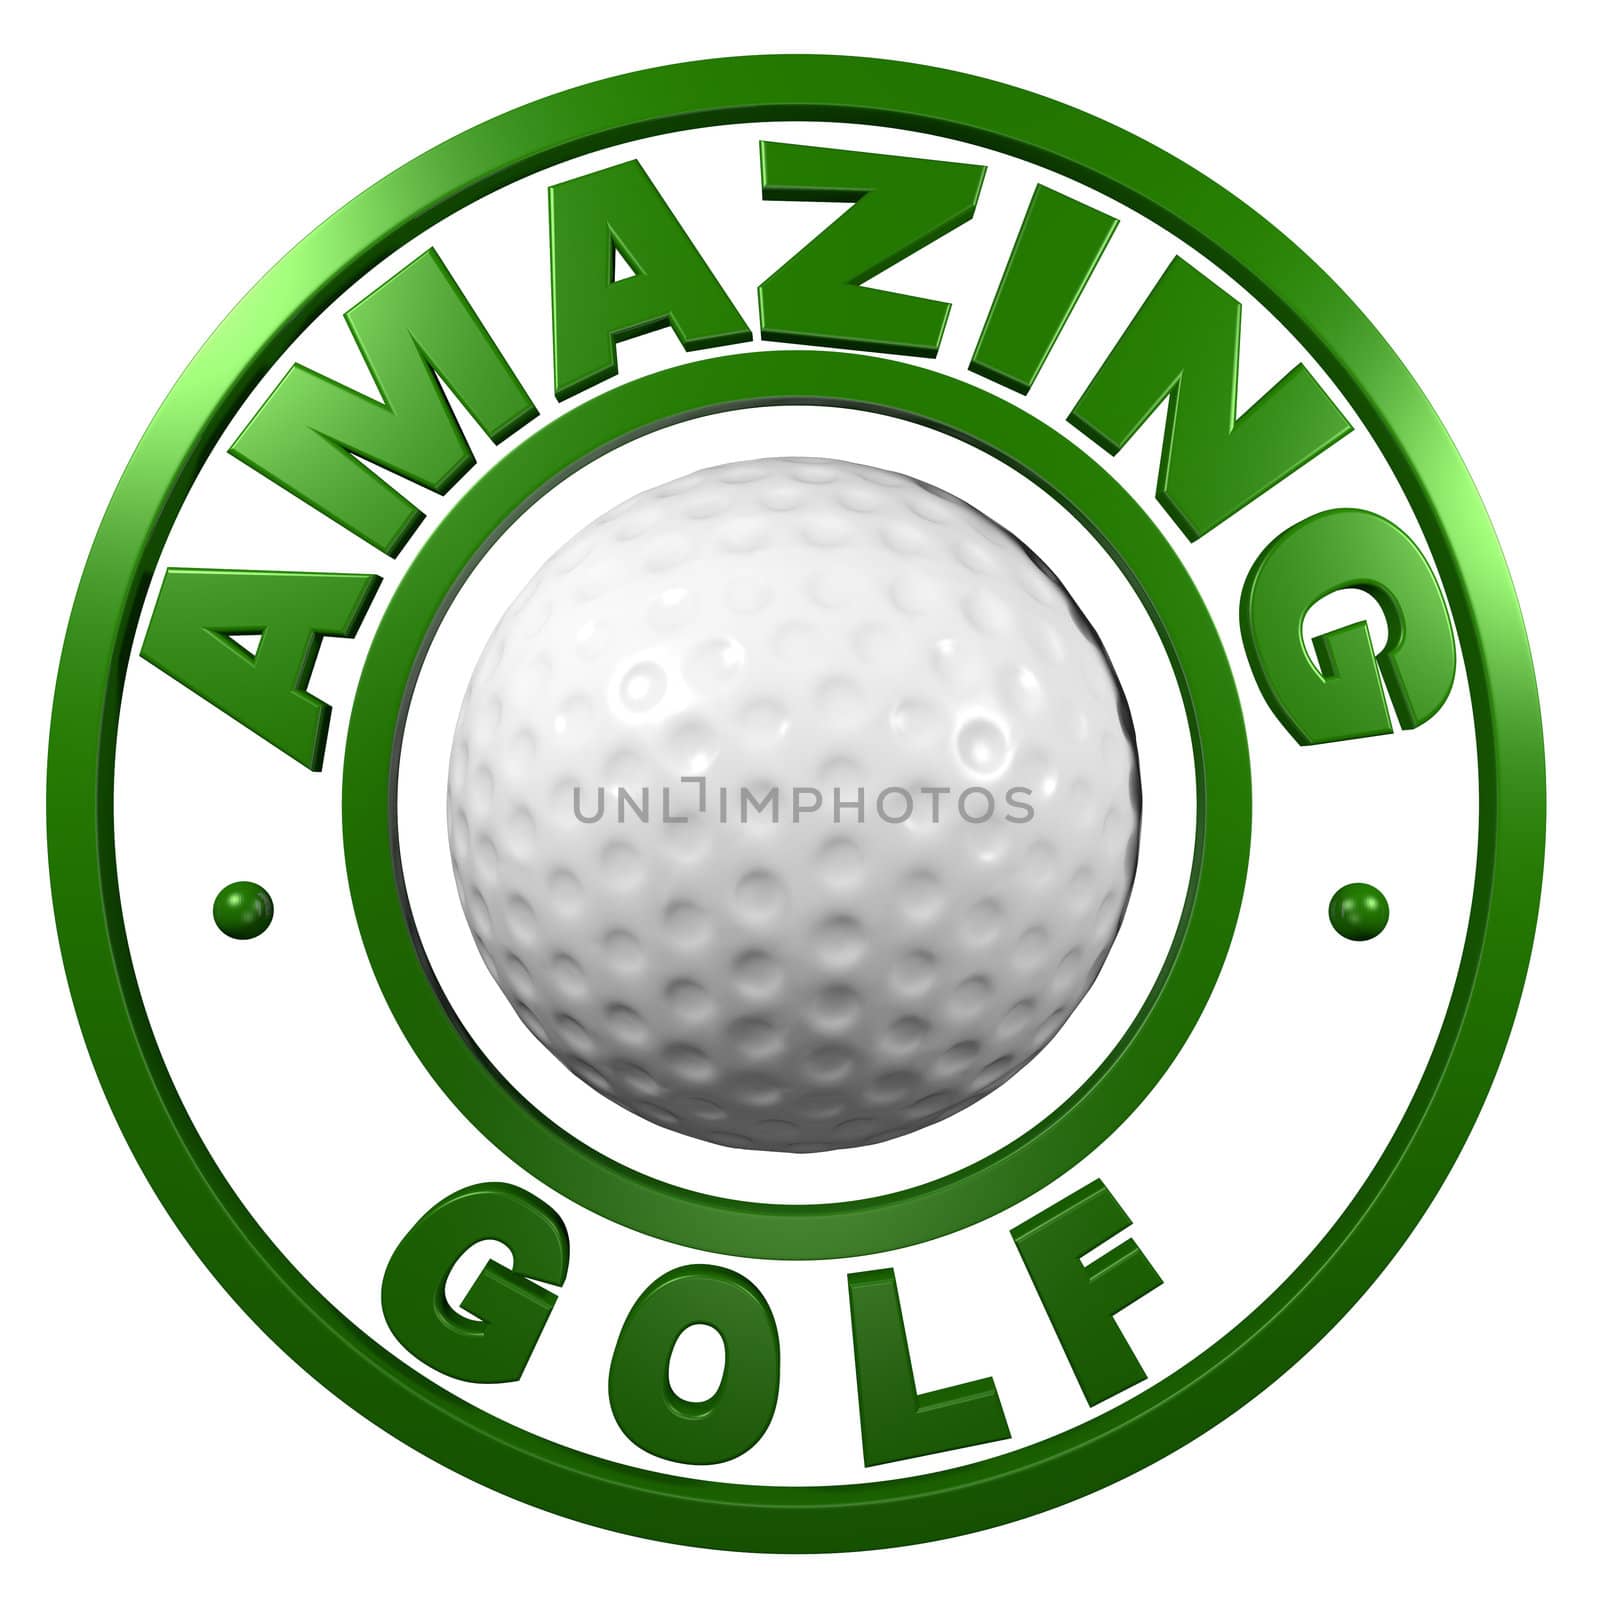 Amazing Golf circular design with a white background